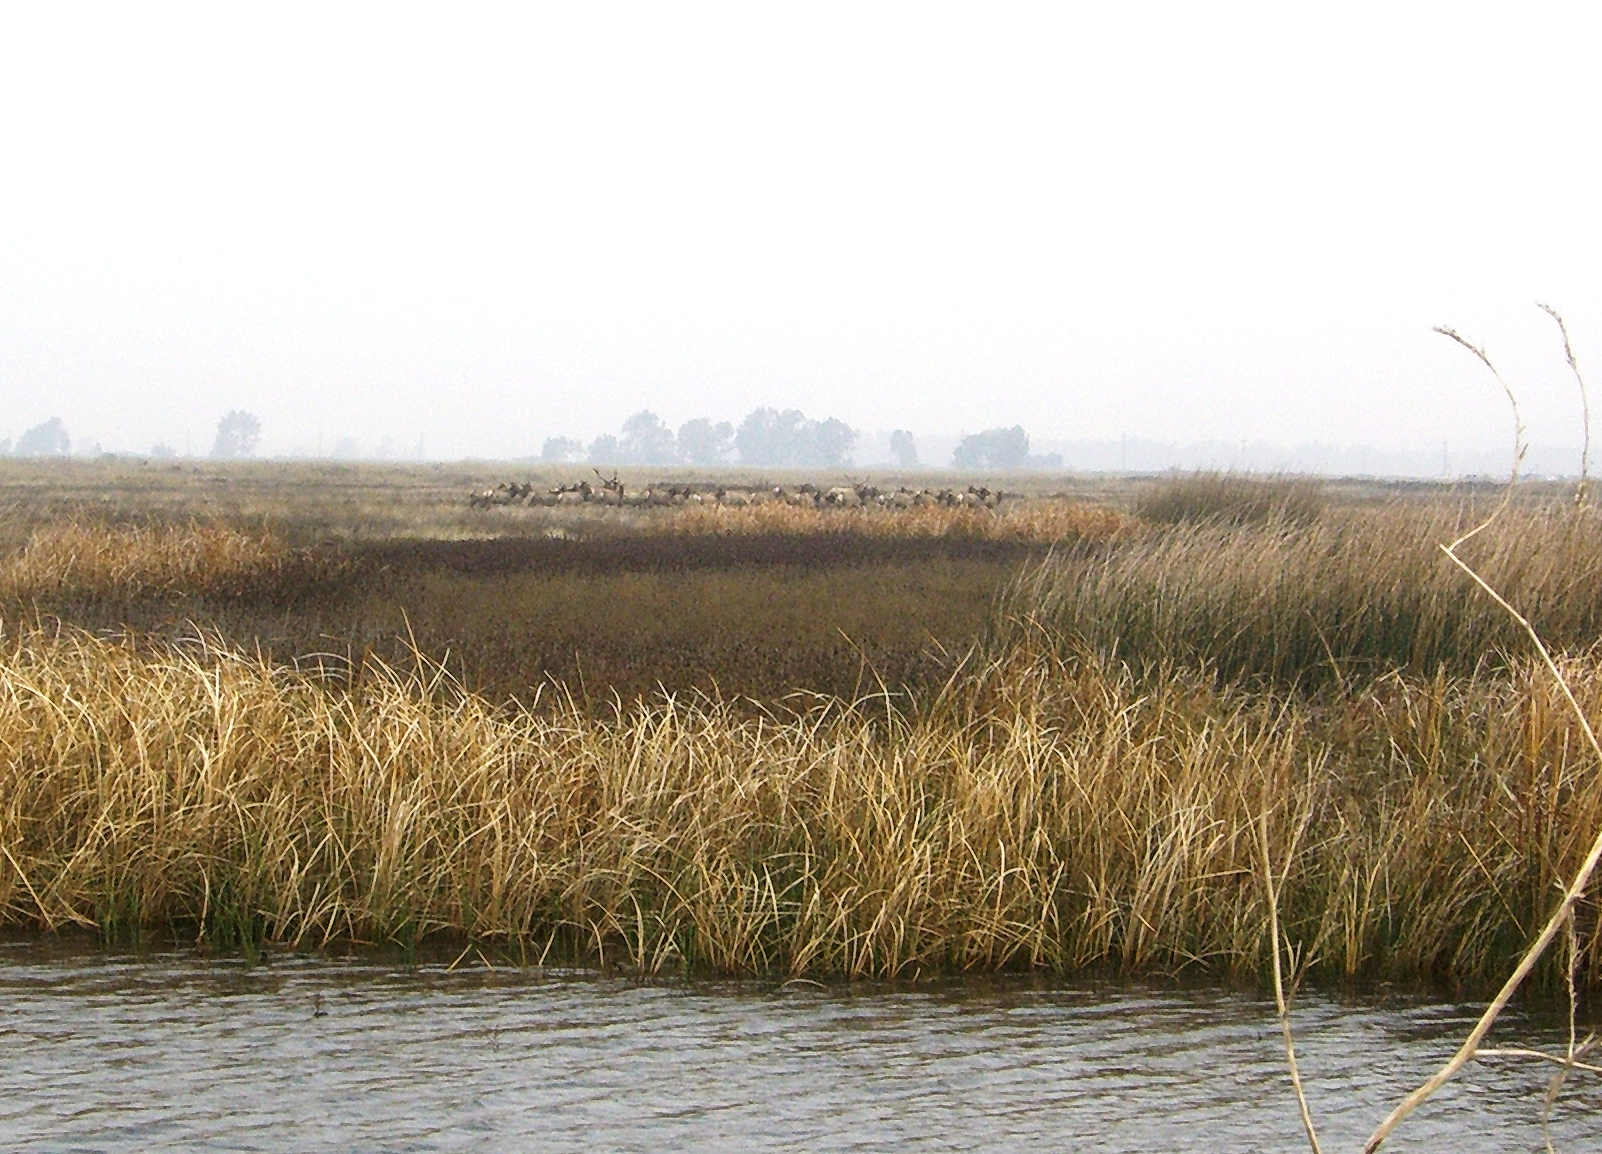 a grass - covered marsh on the edge of a body of water